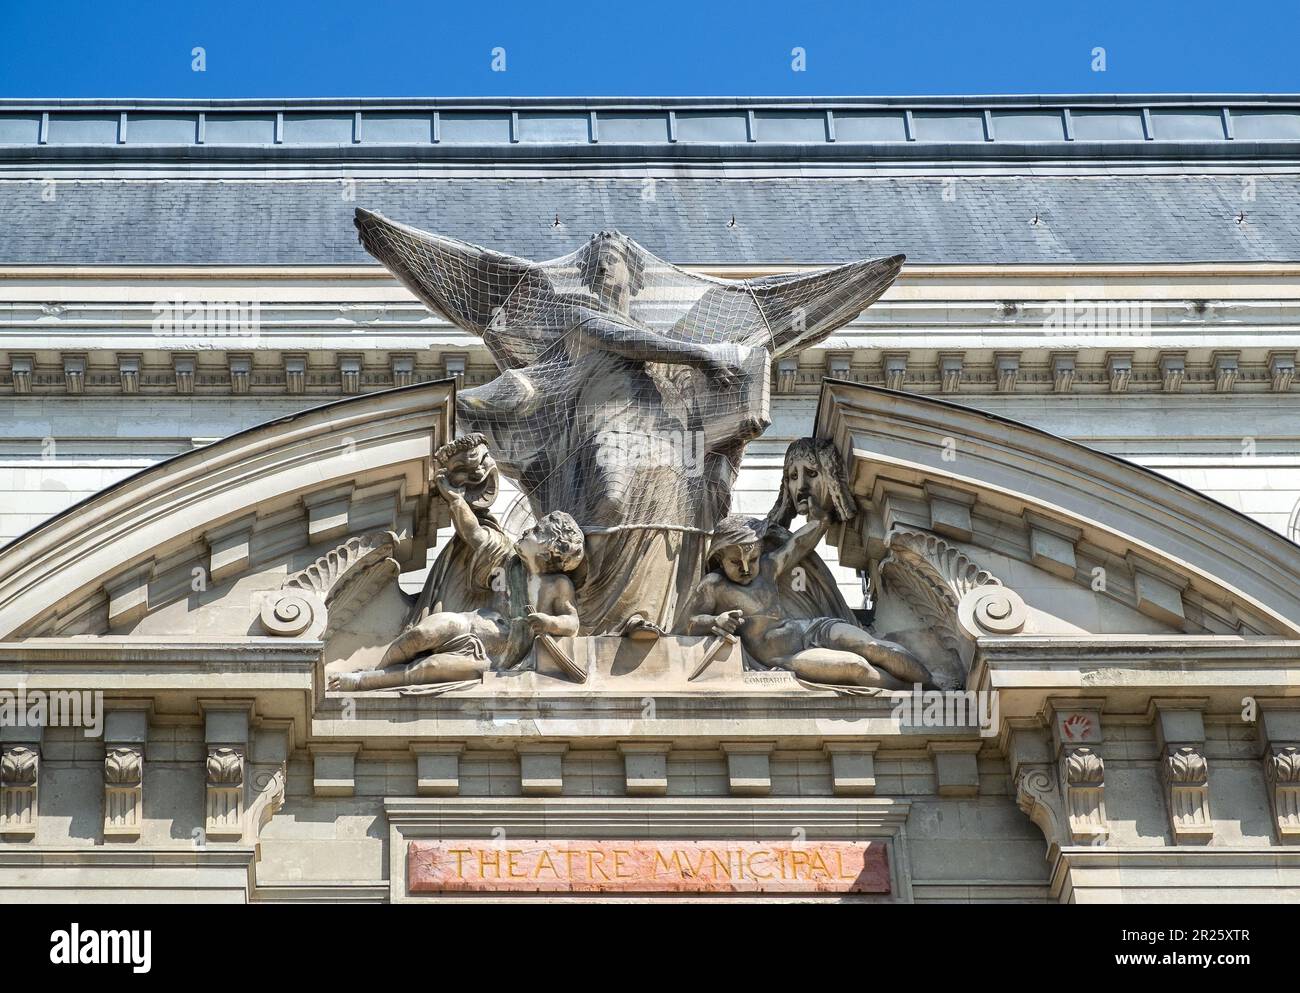 Ornate sculpture (by Combarieu, 1871) above the city opera house / theater - Tours, Indre-et-Loire (37), France. Stock Photo